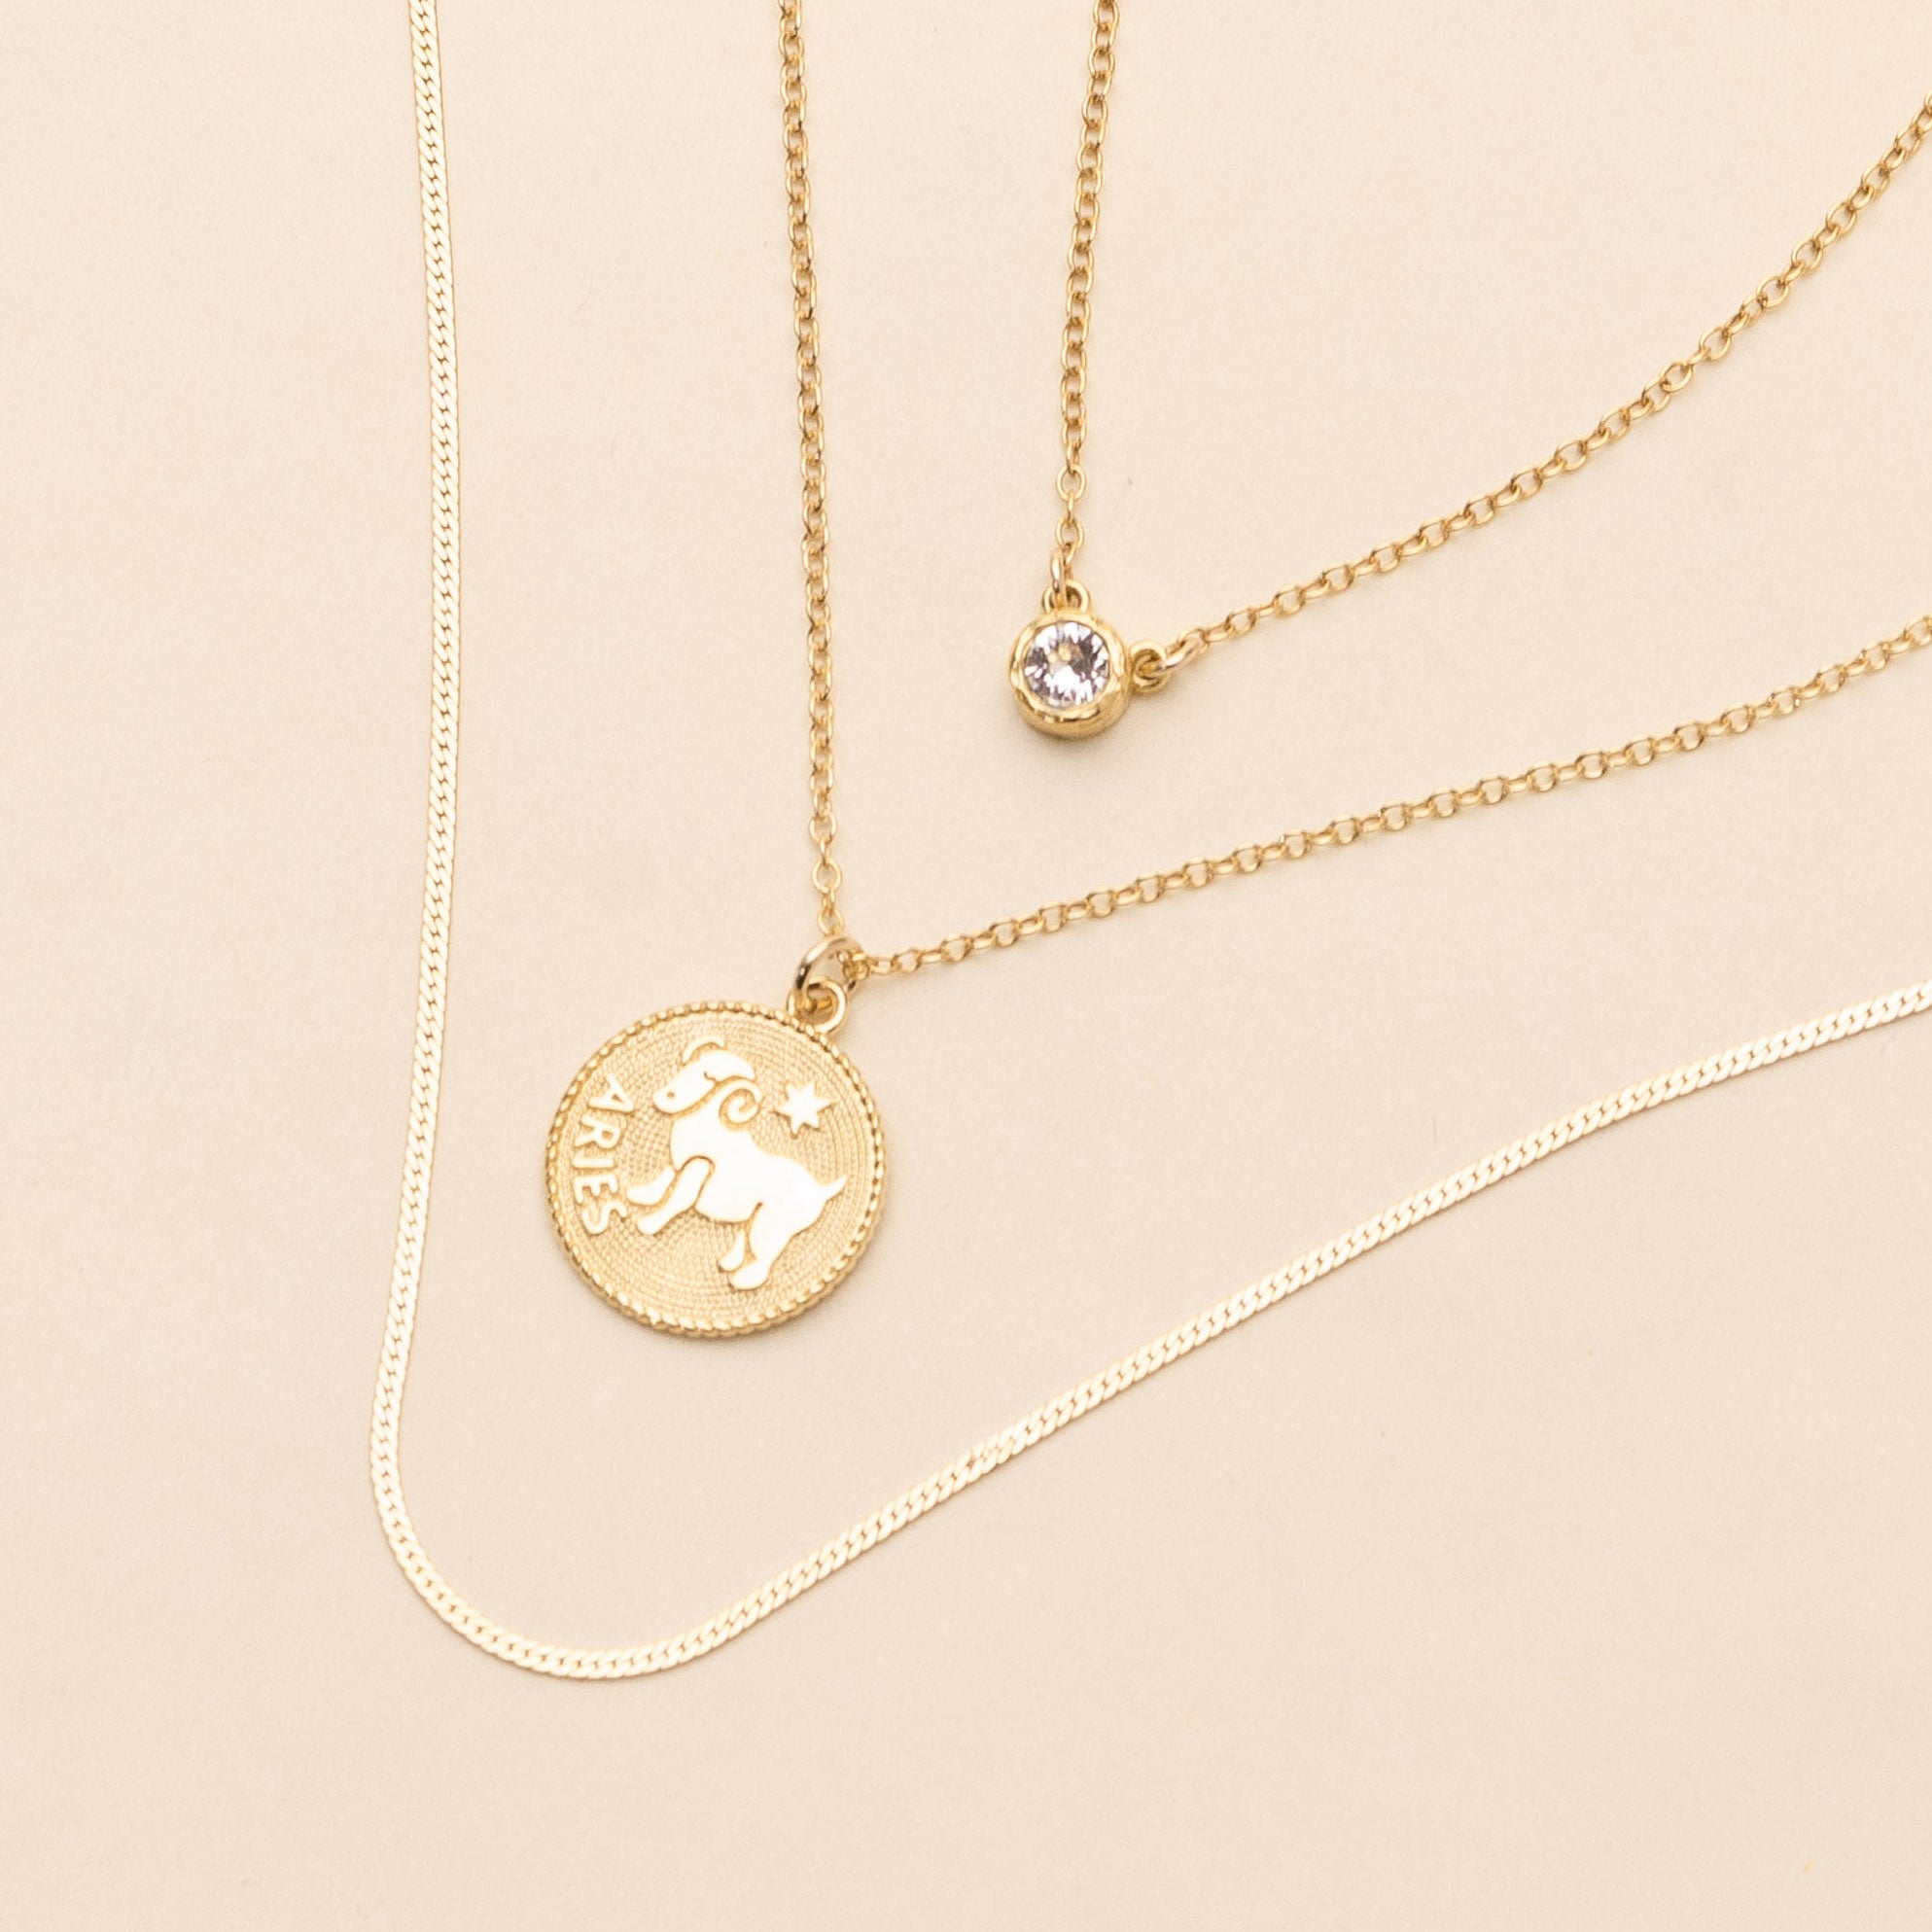 Aries Zodiac Necklace, April Birthstone Necklace, Herrinbone Chain, dainty handmade necklaces by Katie Dean Jewelry_59 square